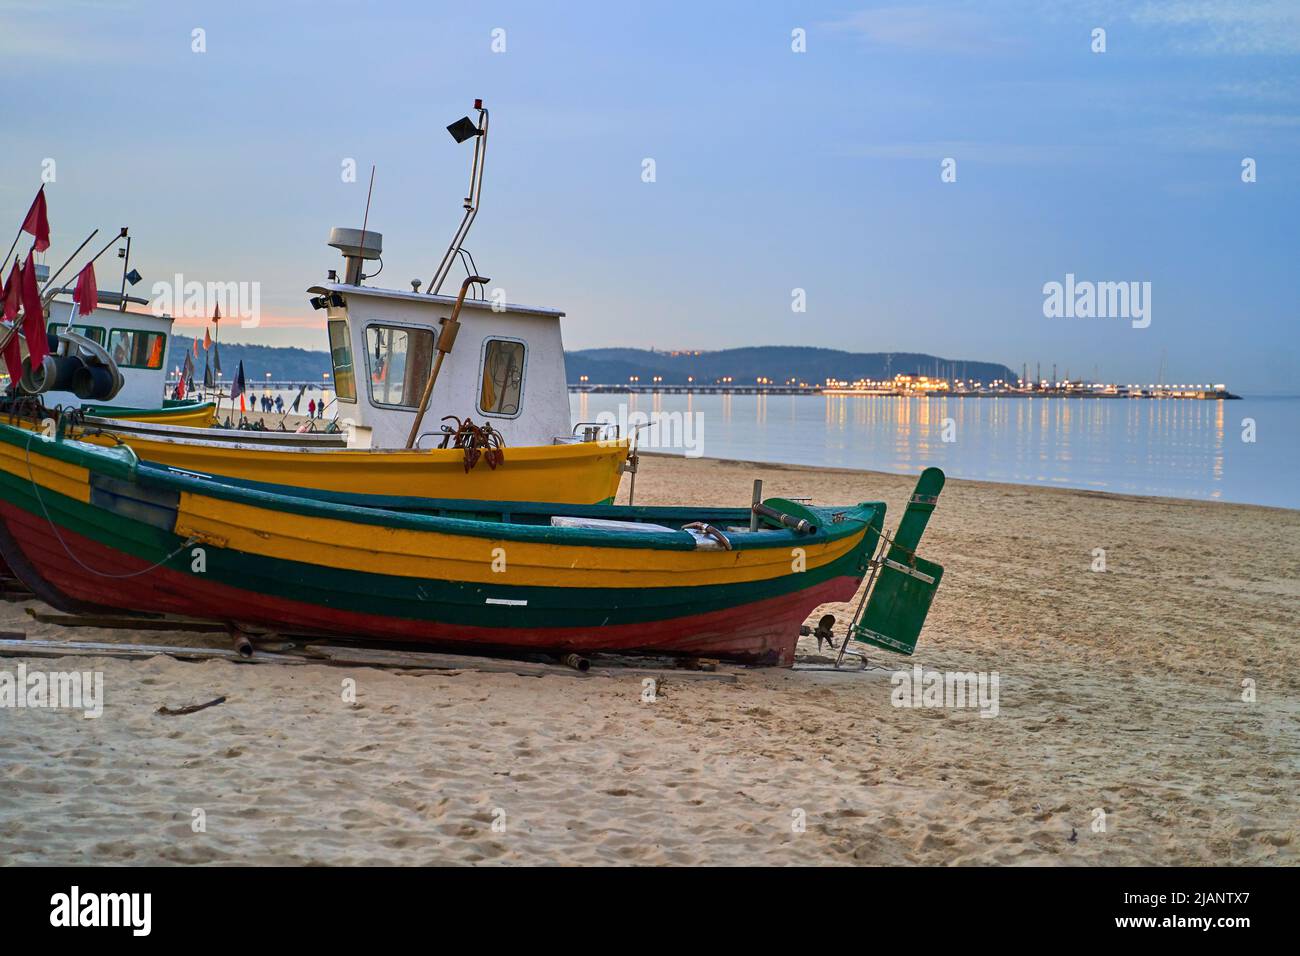 Picturesque fishing boat on beach in Sopot, Pomorskie region, Poland Stock Photo